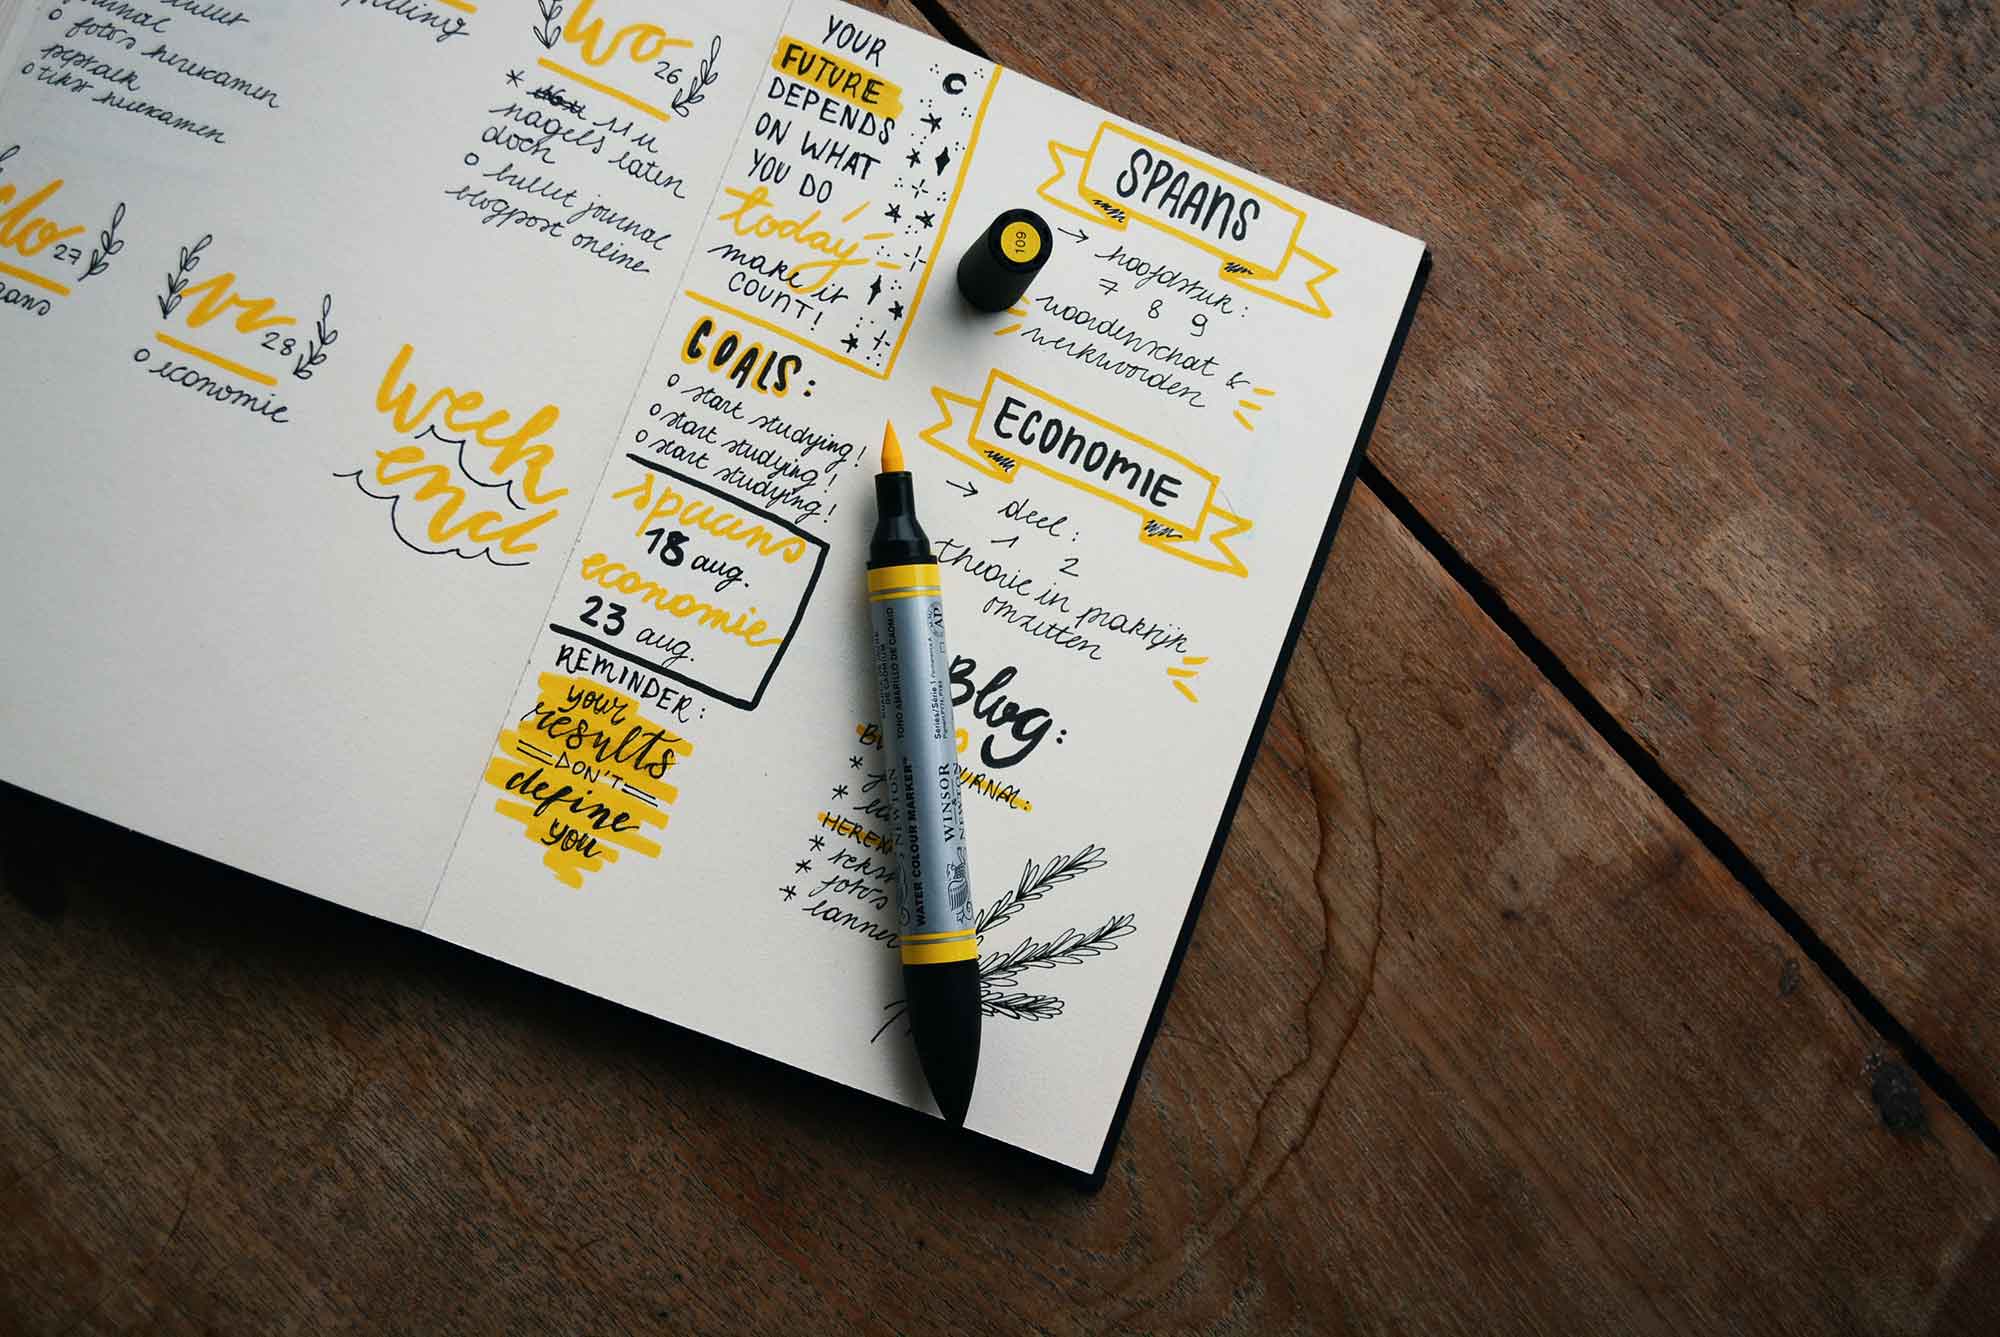 15 Bullet Journal Pages to Try In 2024! 🌟